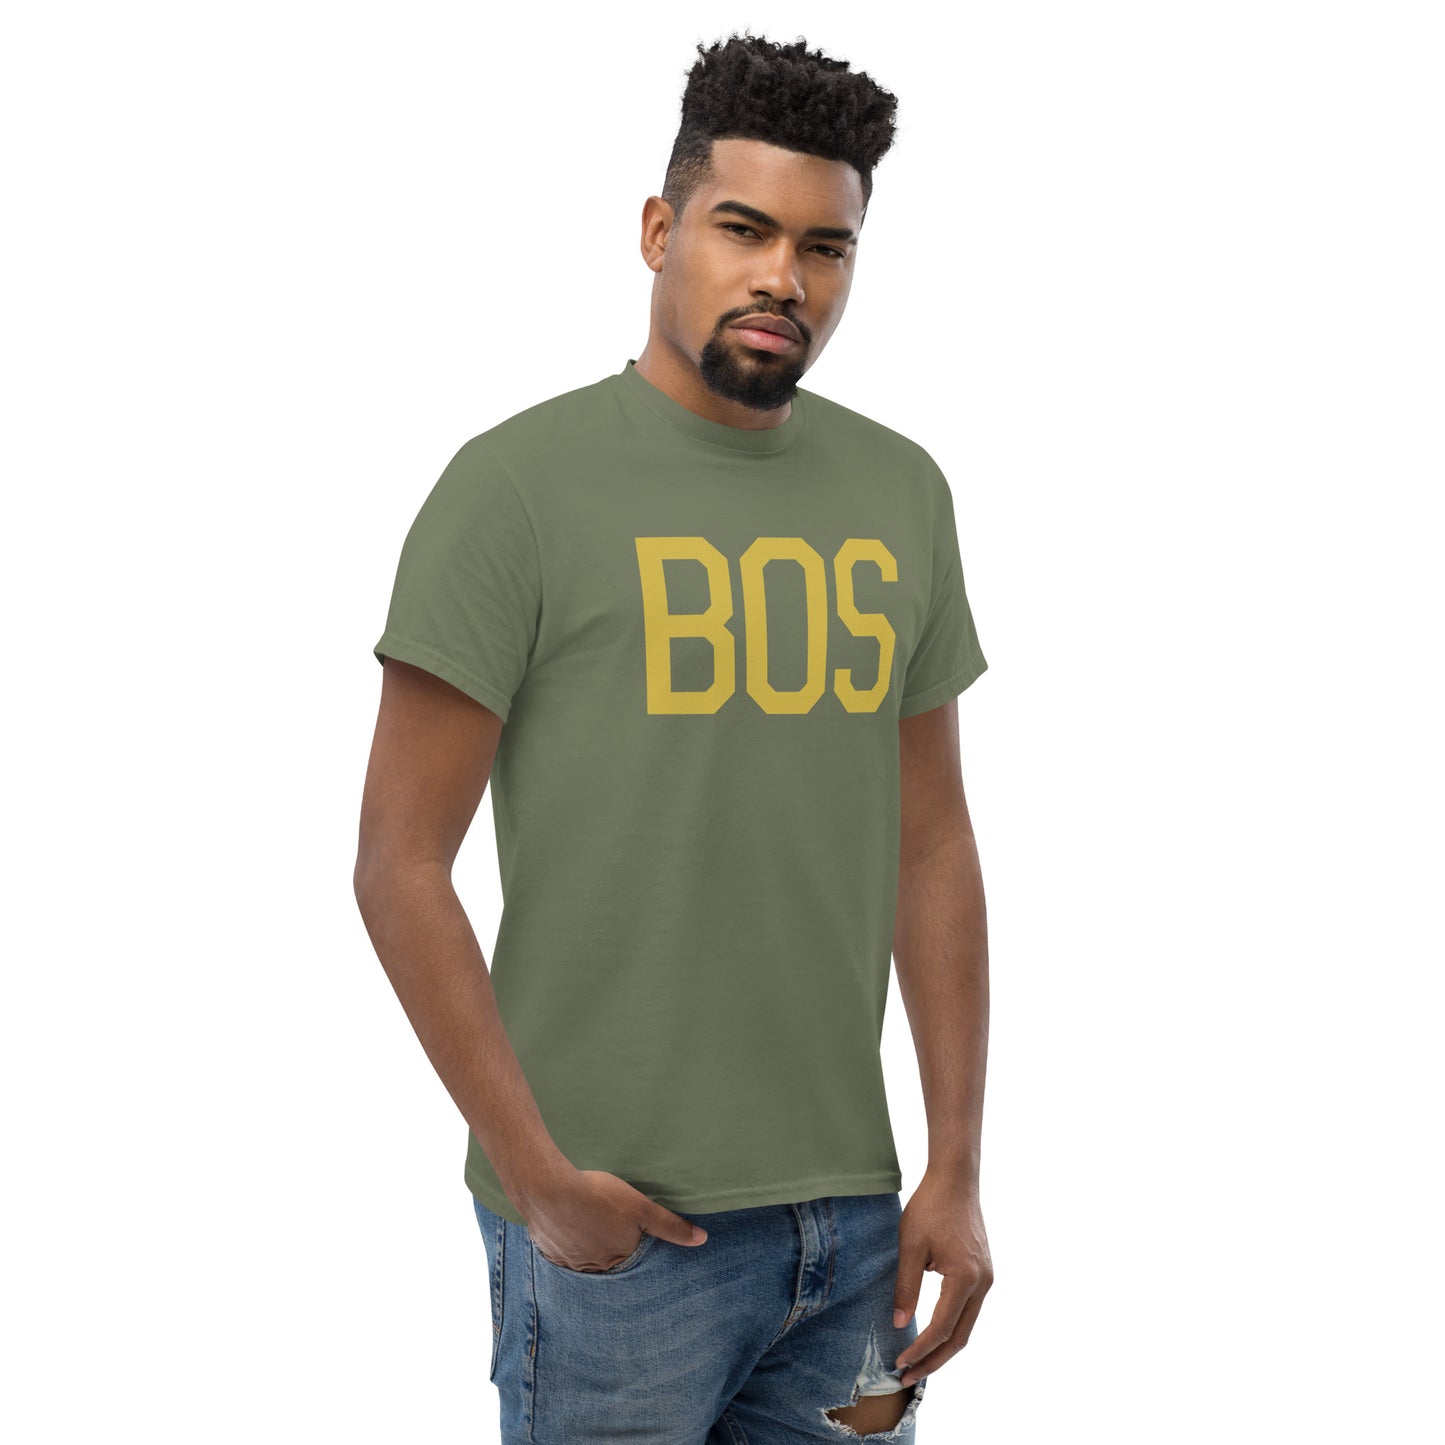 Aviation Enthusiast Men's Tee - Old Gold Graphic • BOS Boston • YHM Designs - Image 08